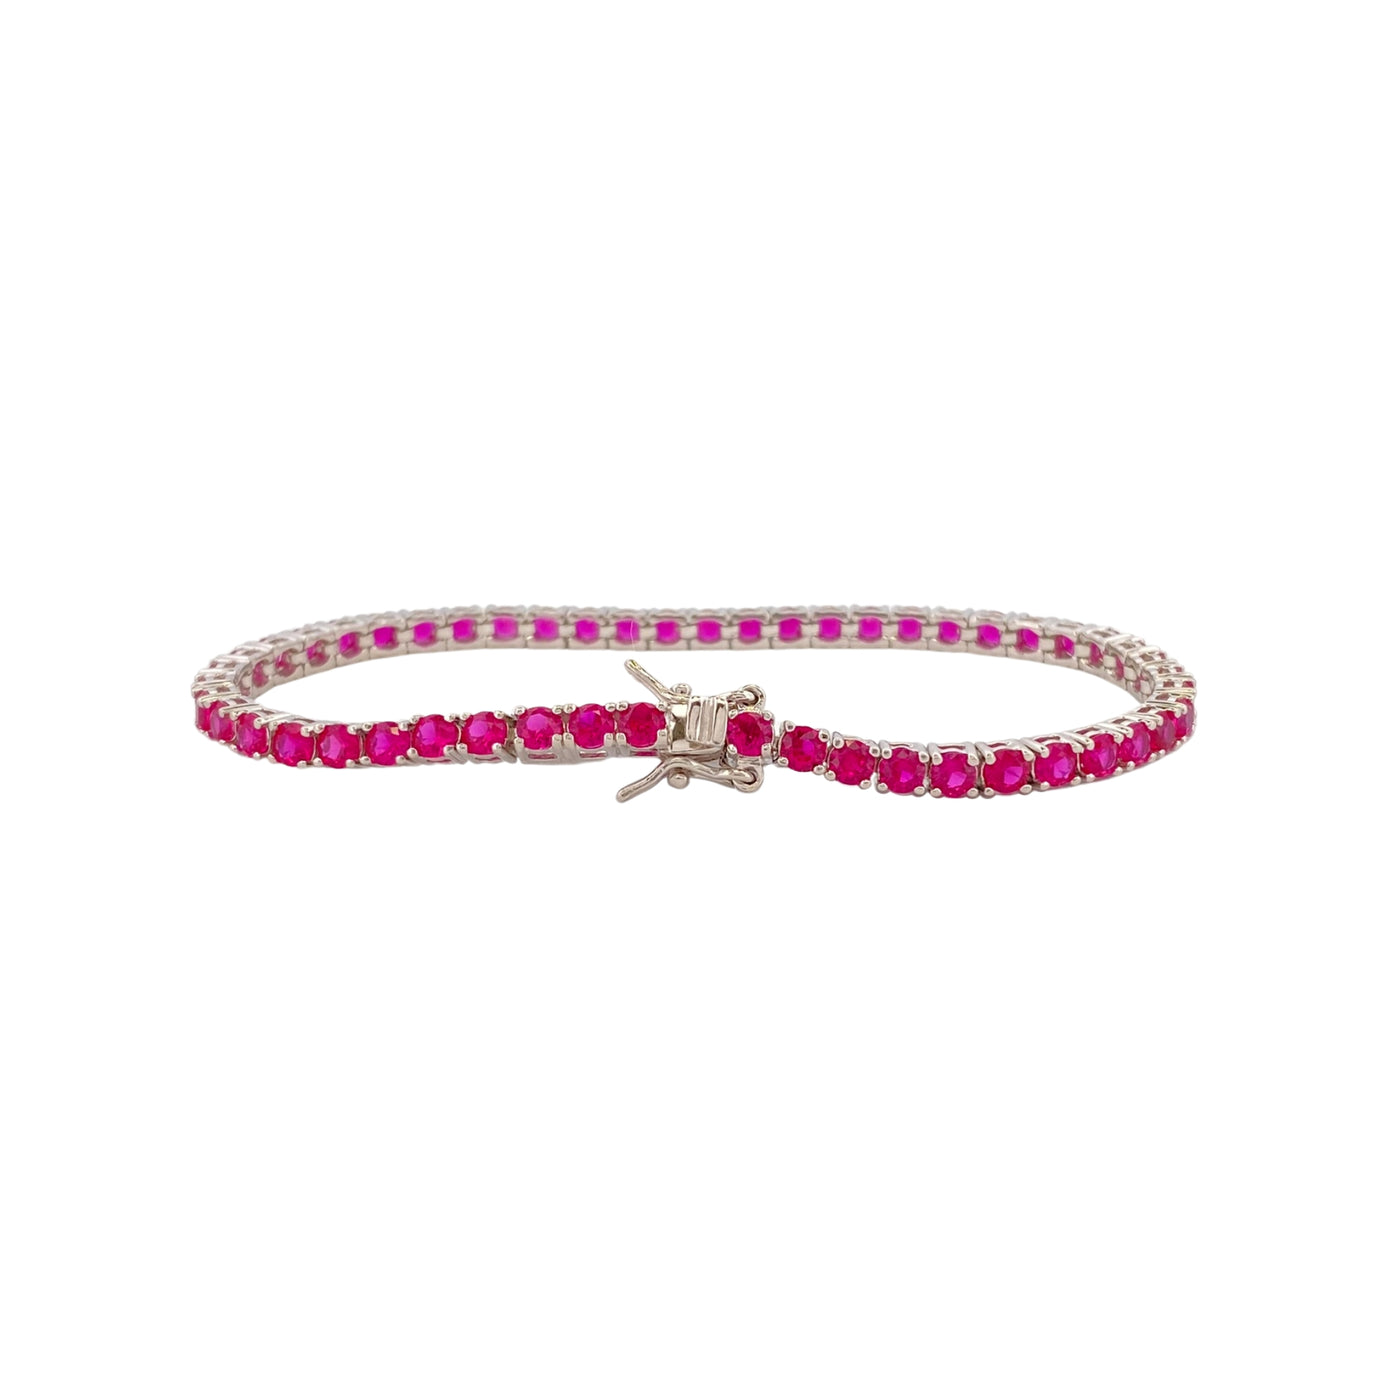 Silver bracelet casting tennis with ruby cubic zirconia - 3 mm